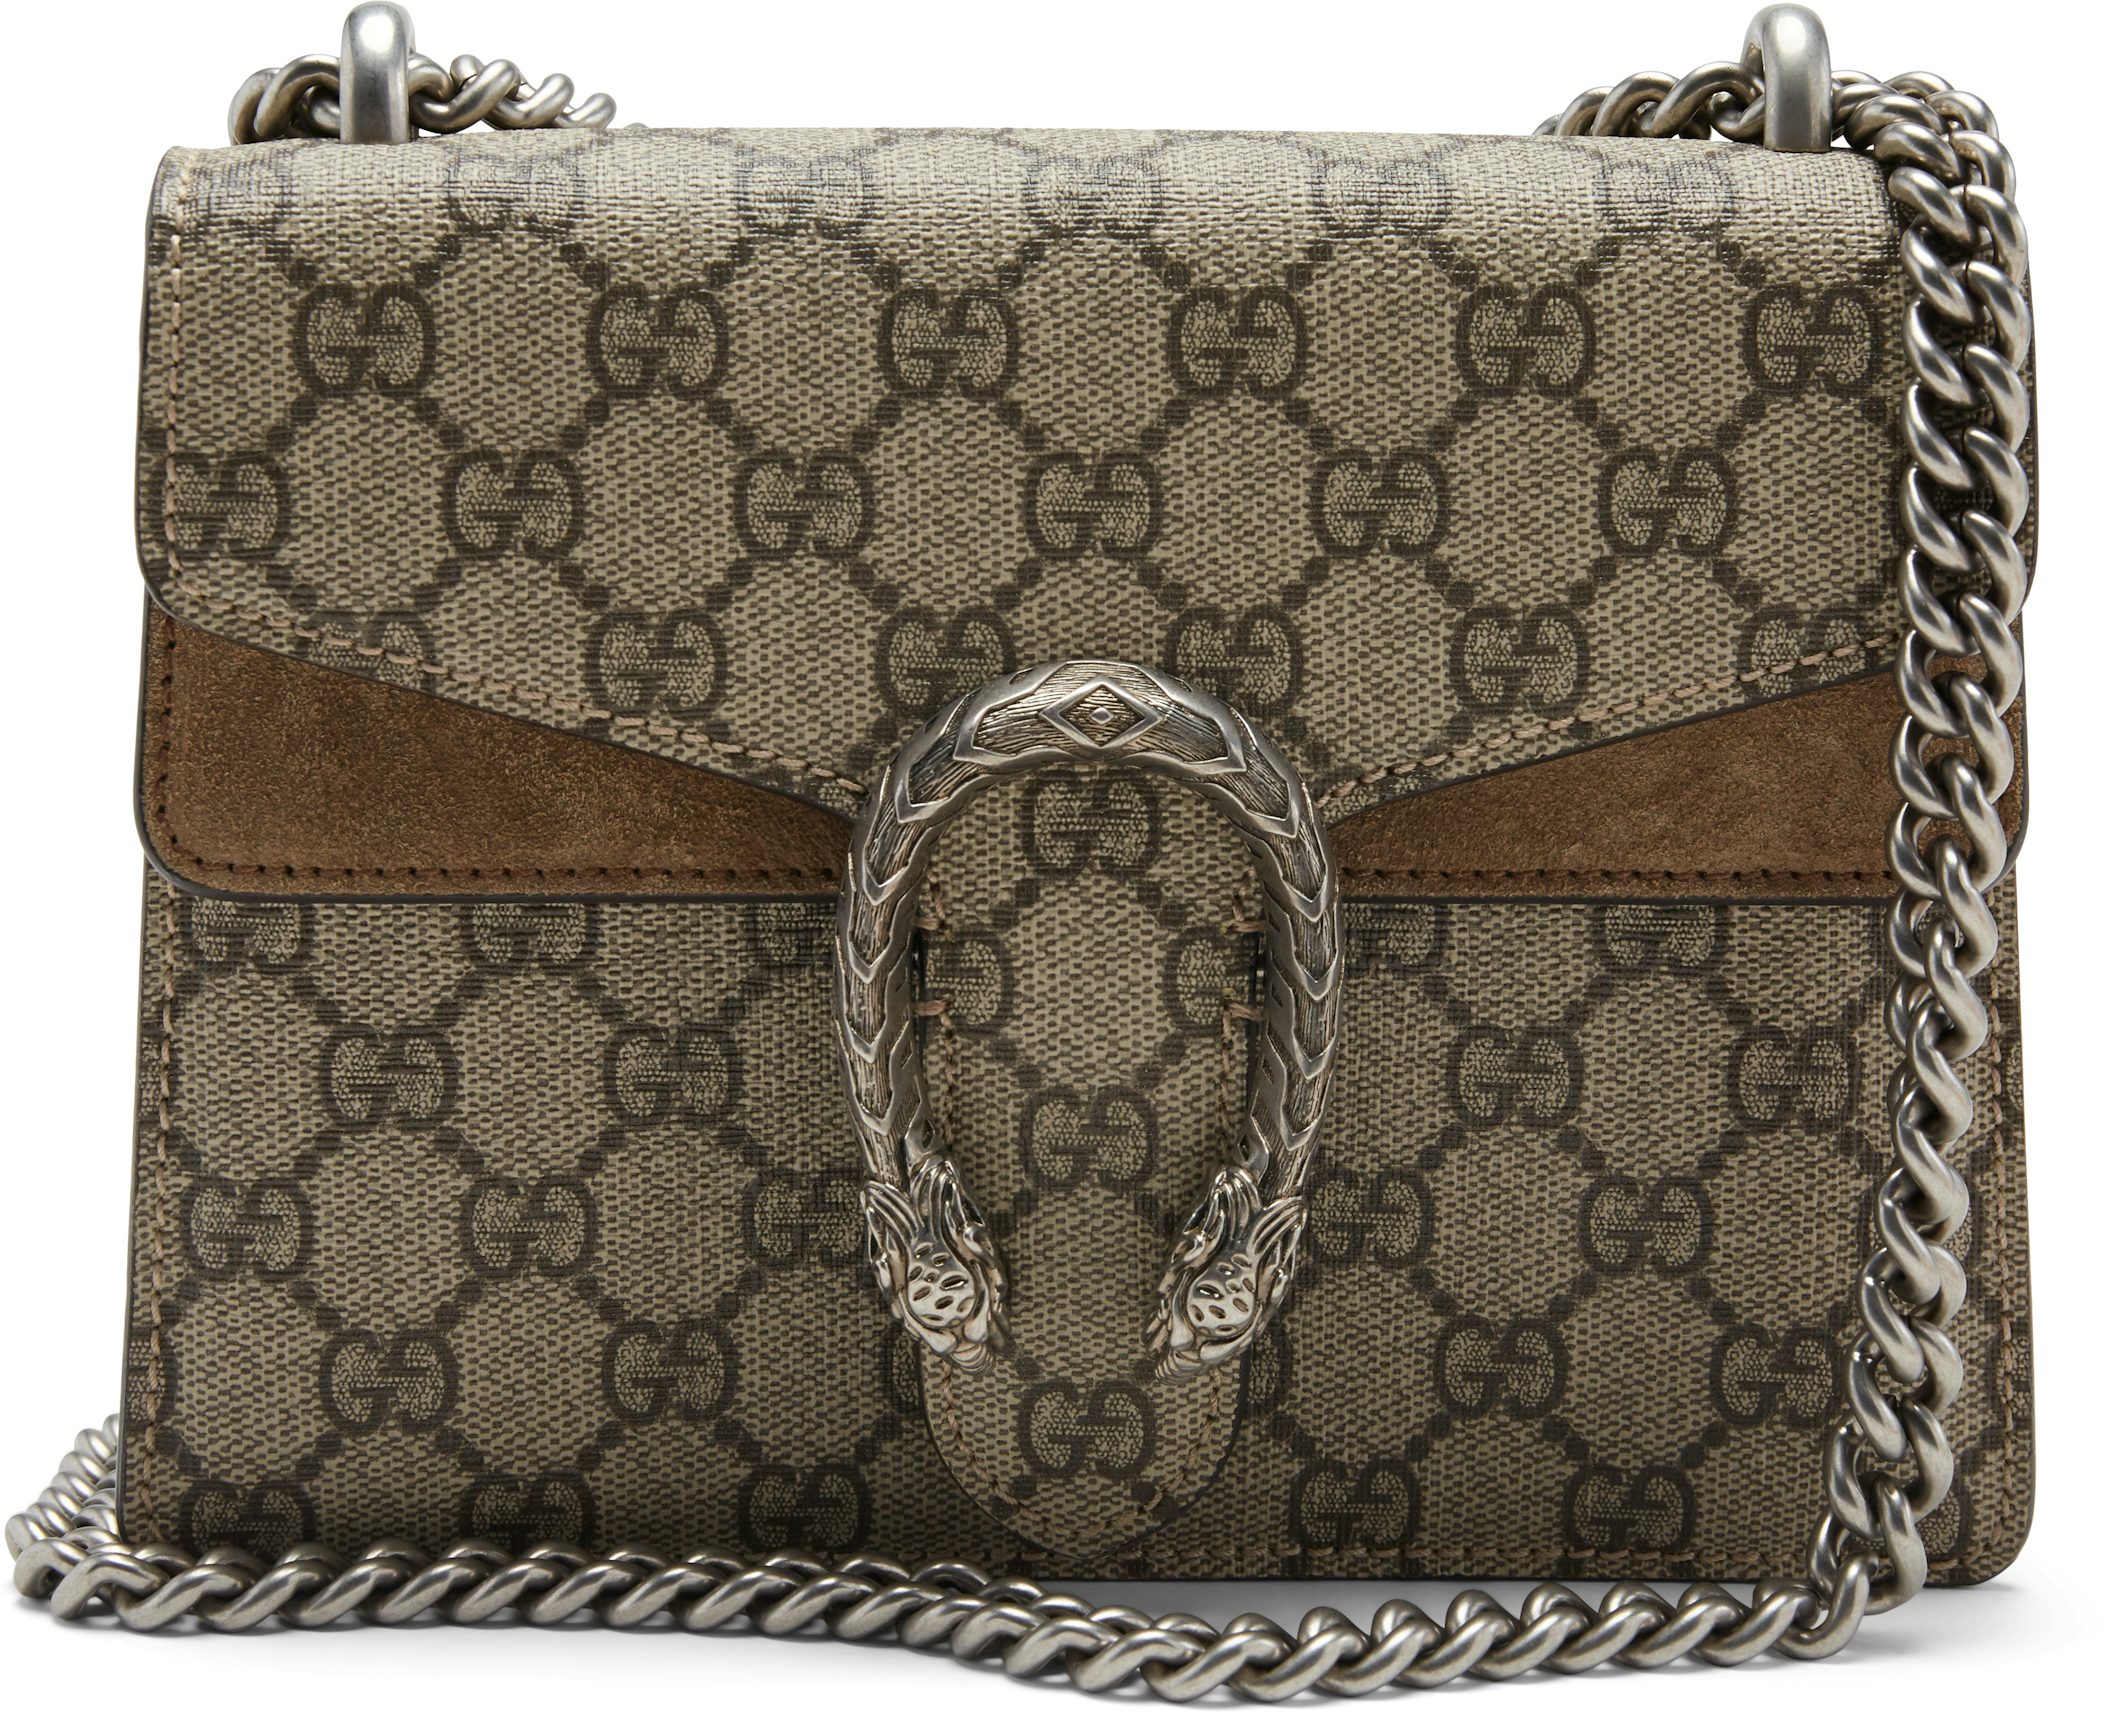 Gucci of Italy Ladies Golf Tote Purse